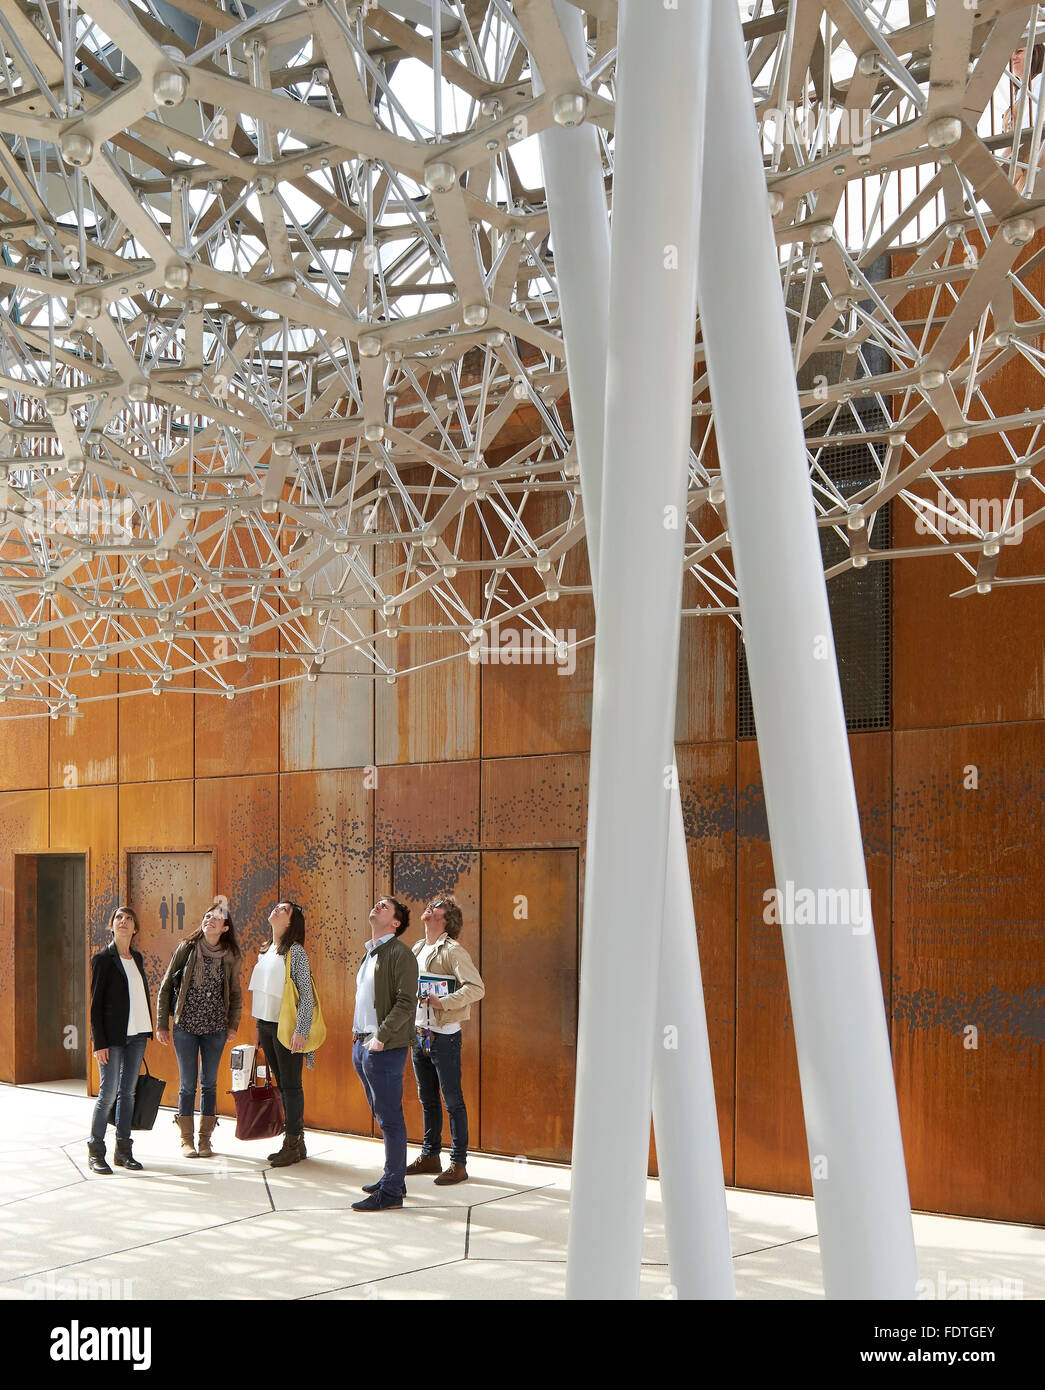 Rooftop underneath hive structure. Milan Expo 2015, UK Pavilion, Milan, Italy. Architect: Wolfgang Buttress, 2015. Stock Photo